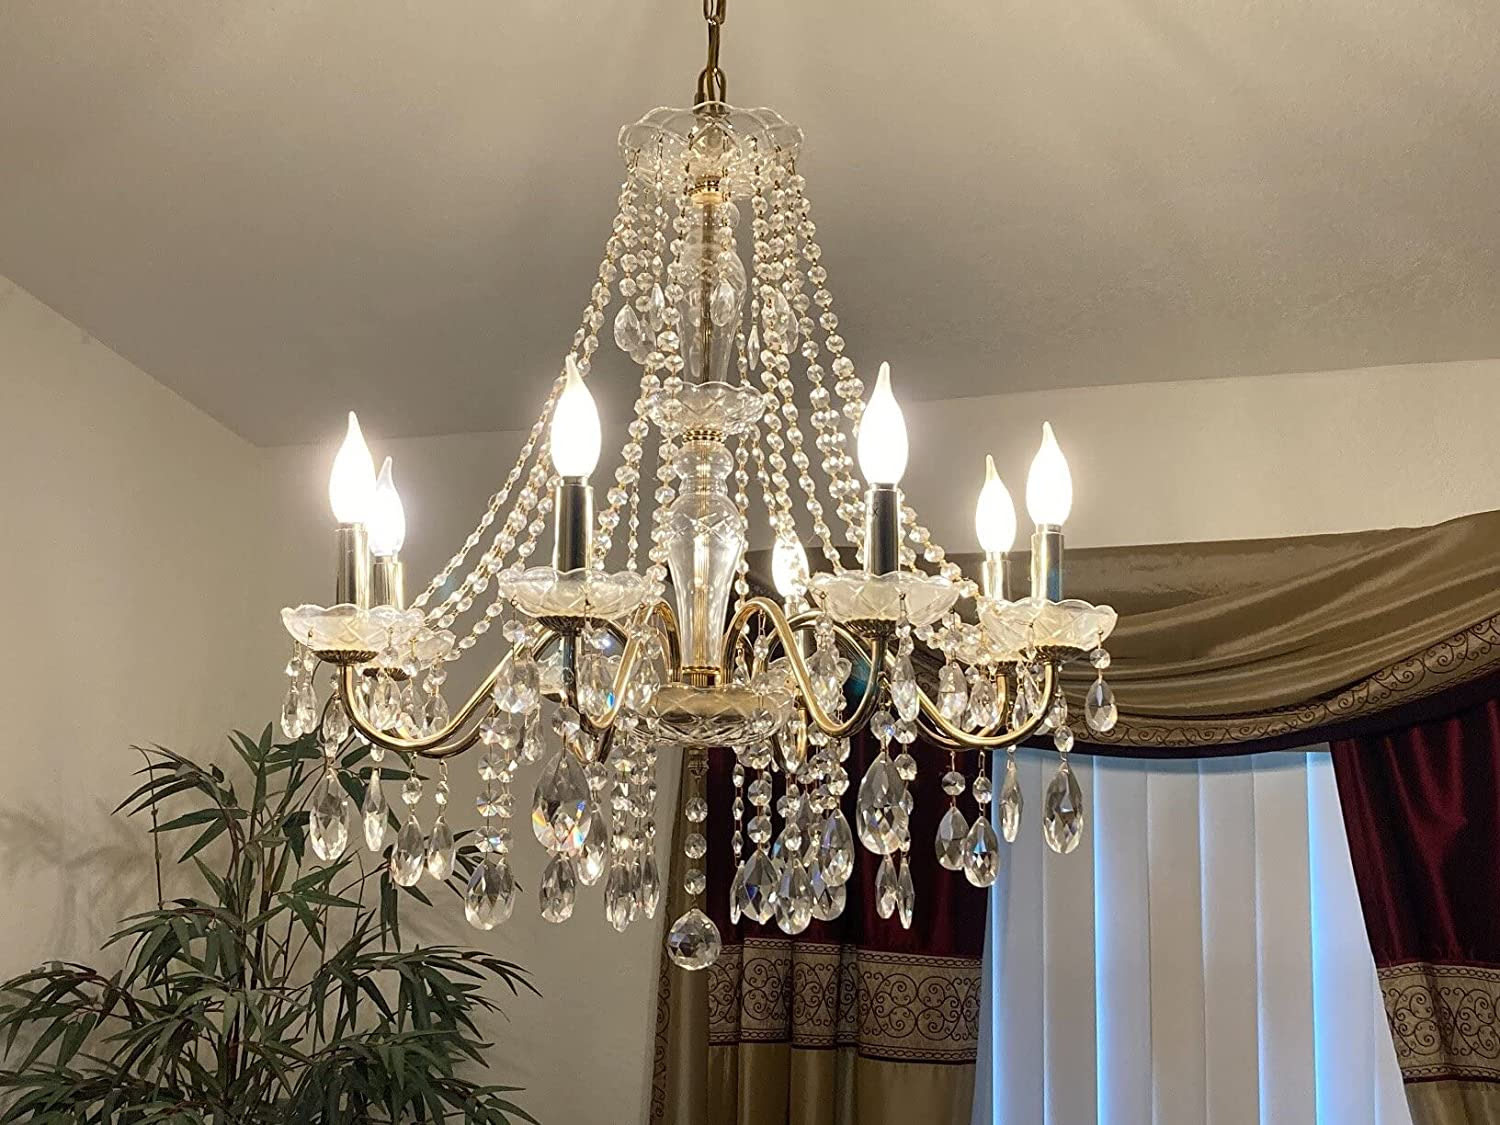 What Size Are Chandelier Bulbs